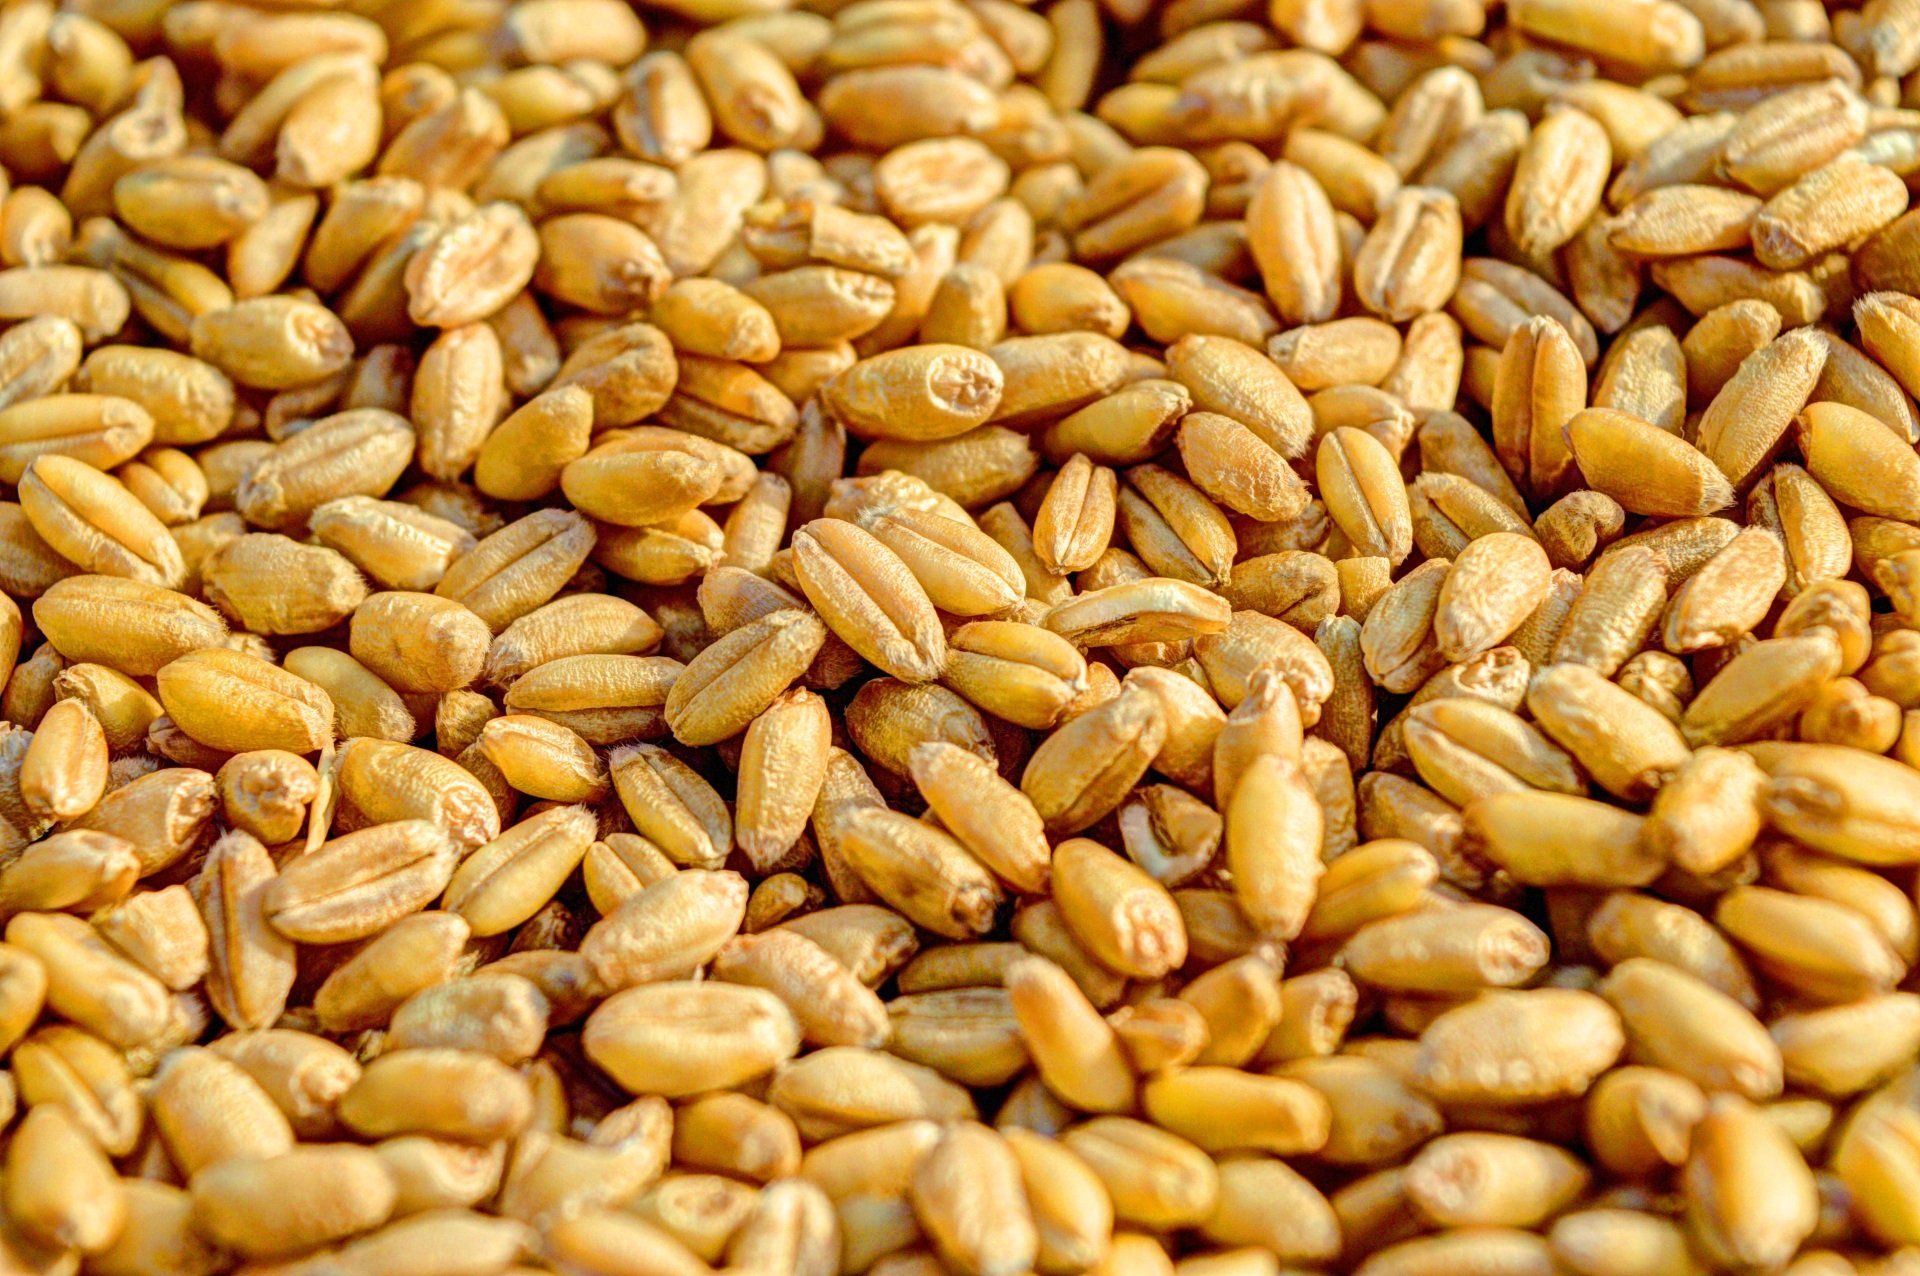 a close up of a pile of wheat grains